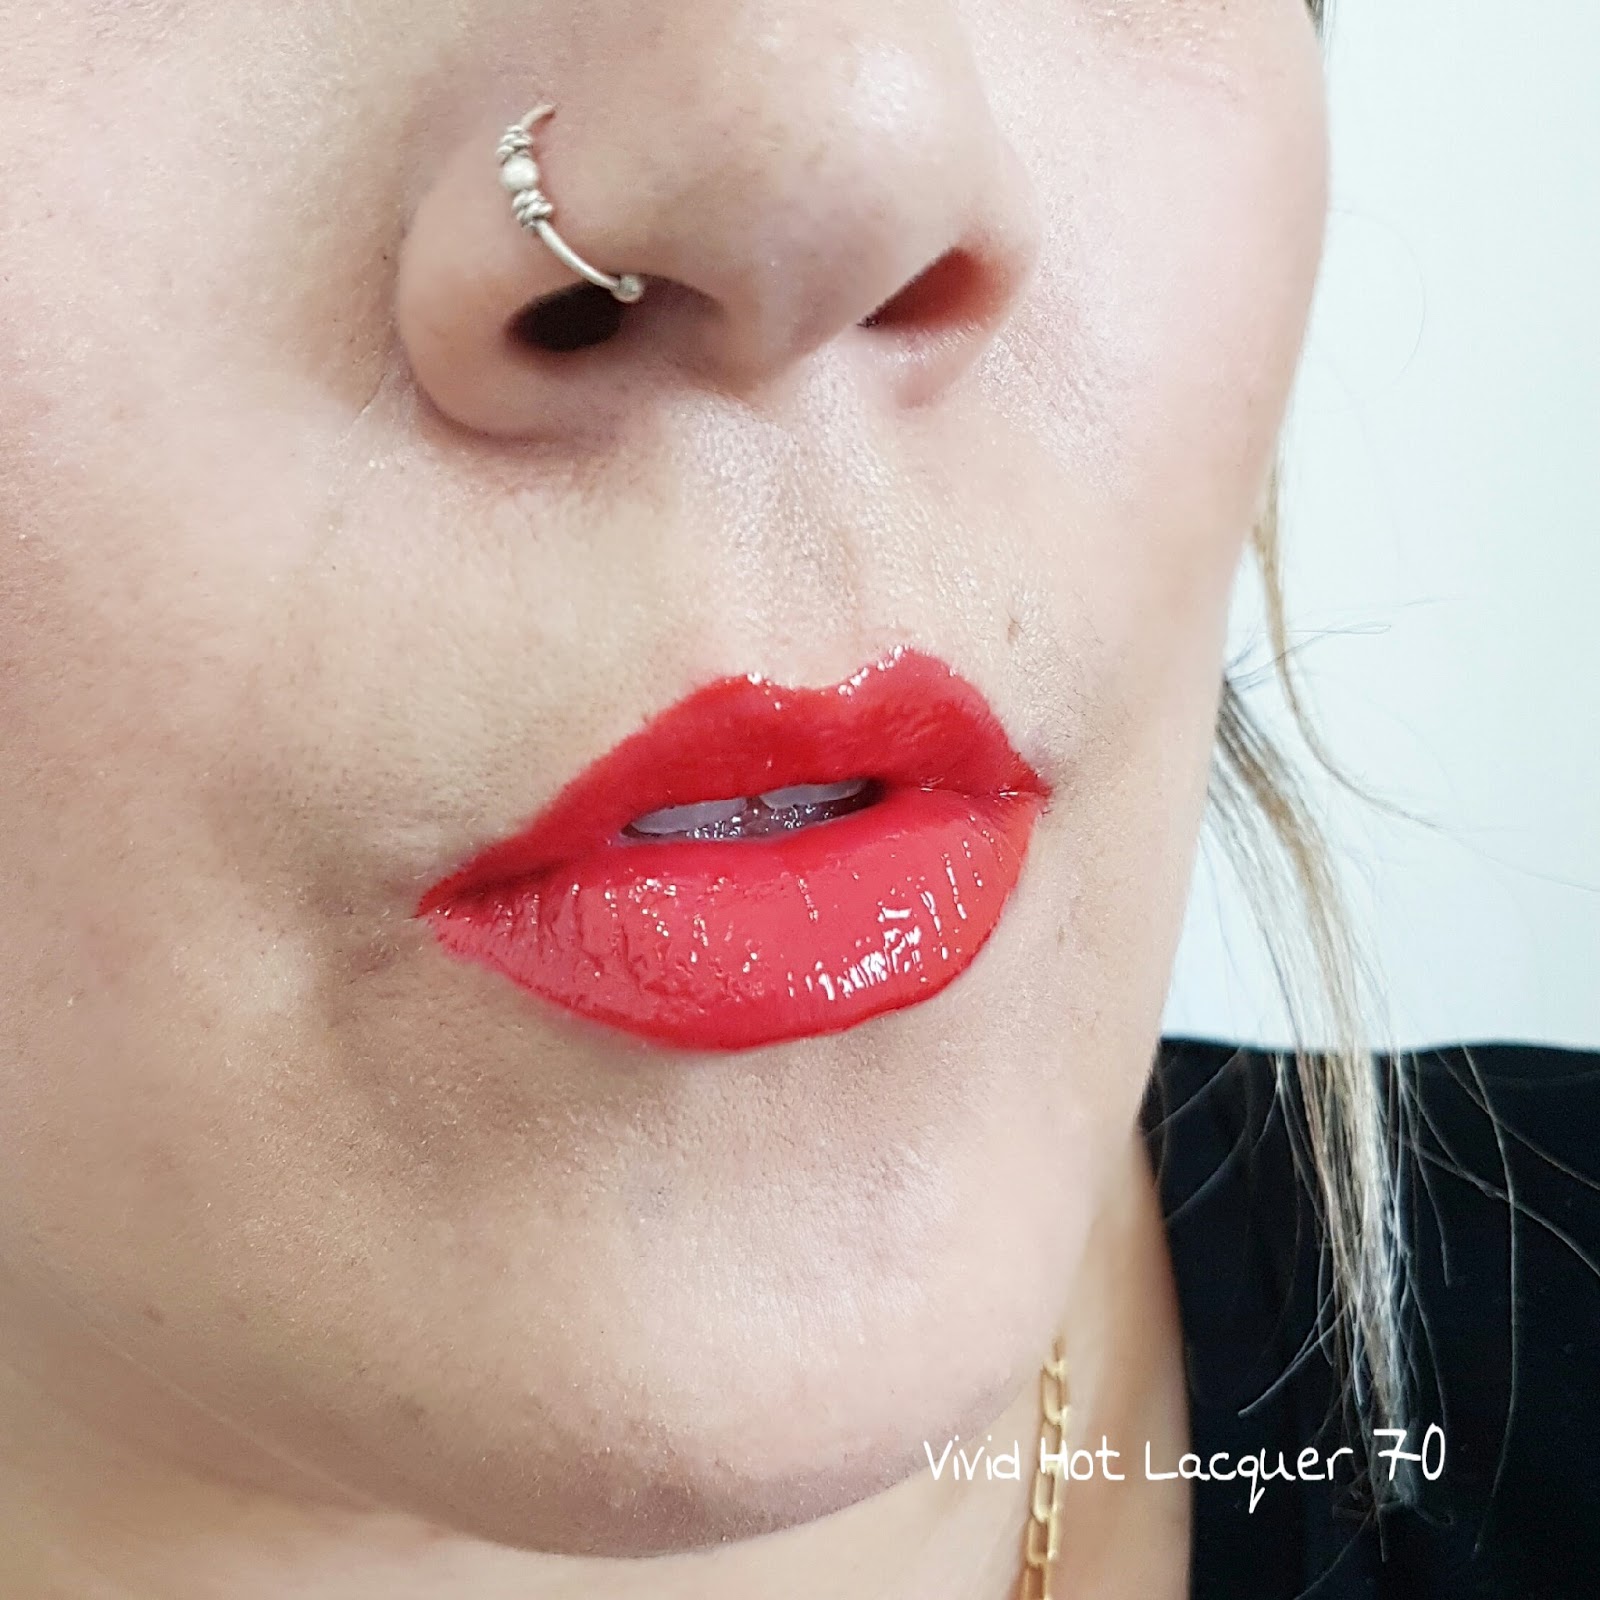 swatch_vivid_hot_lacquer_maybelline_concours_mama_syca_beaute